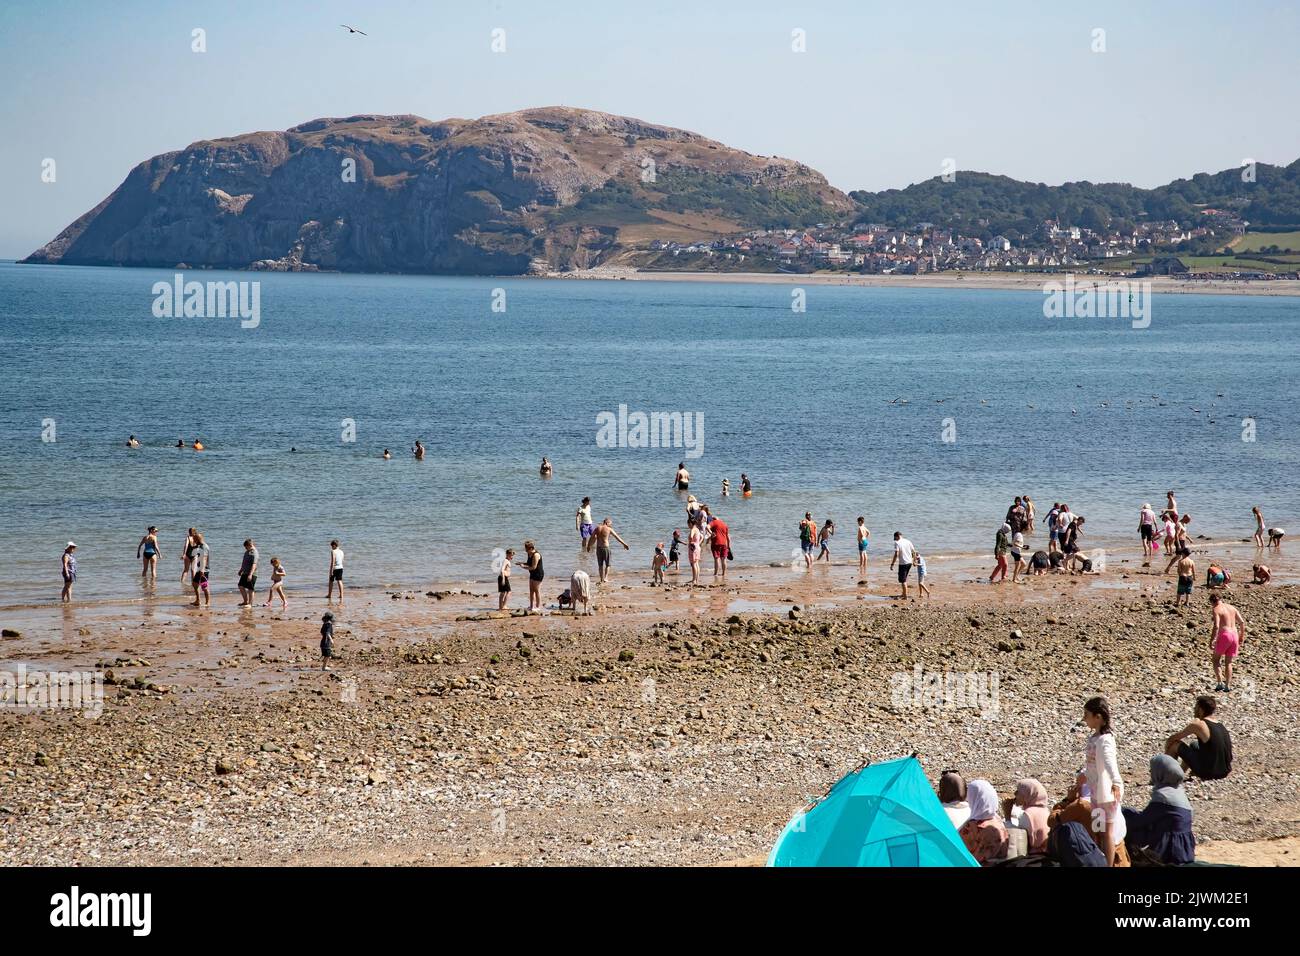 Bathers and beachgoers on the North Shore at Llandudno, Conwy  enjoying the hot summer sun and sea with the Little Orme headland in the background Stock Photo